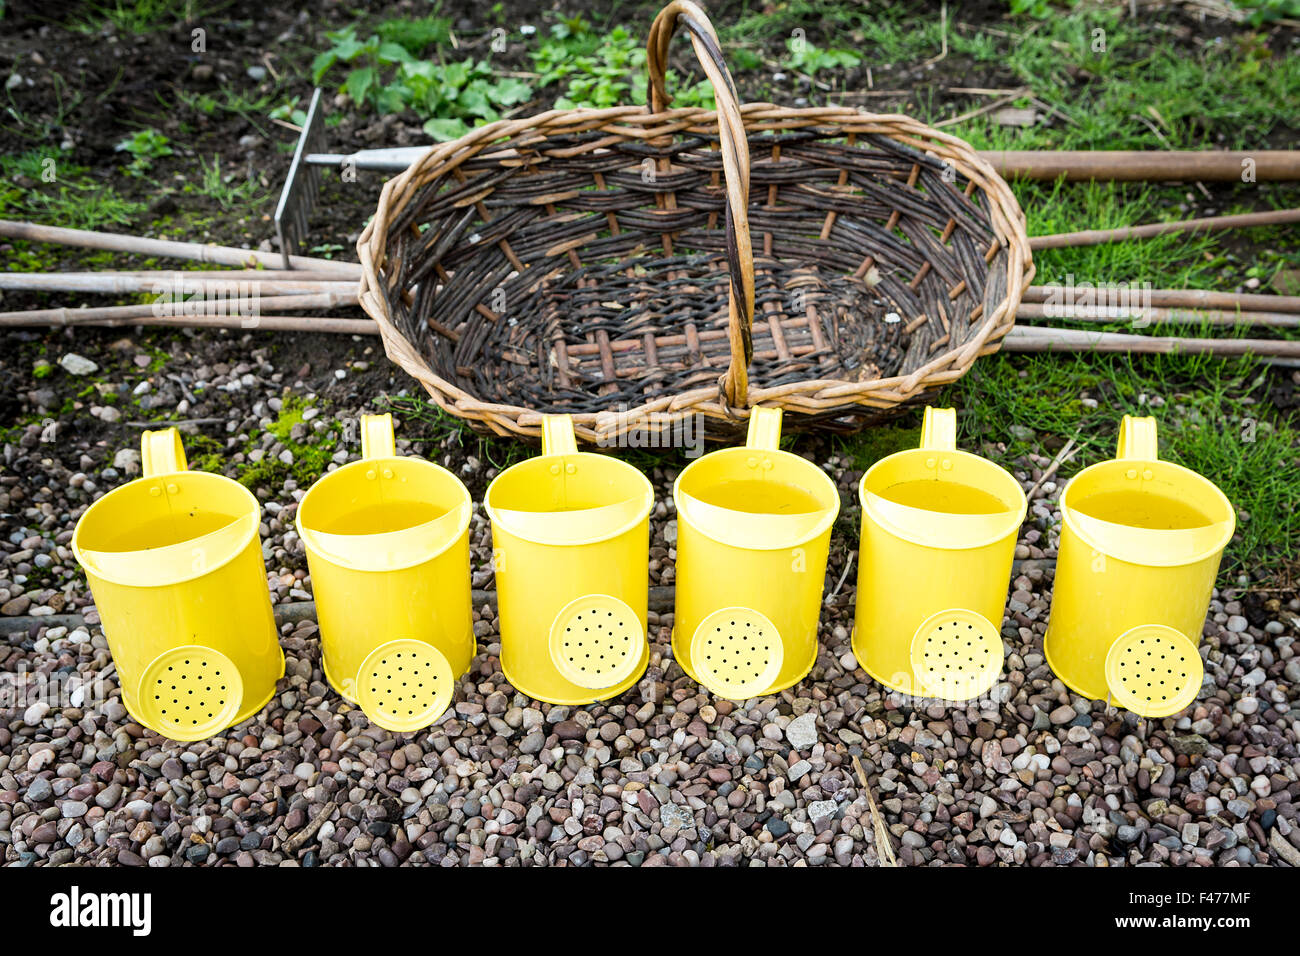 Row of yellow childrens' watering cans next to some canes and wicker gardening trug Stock Photo